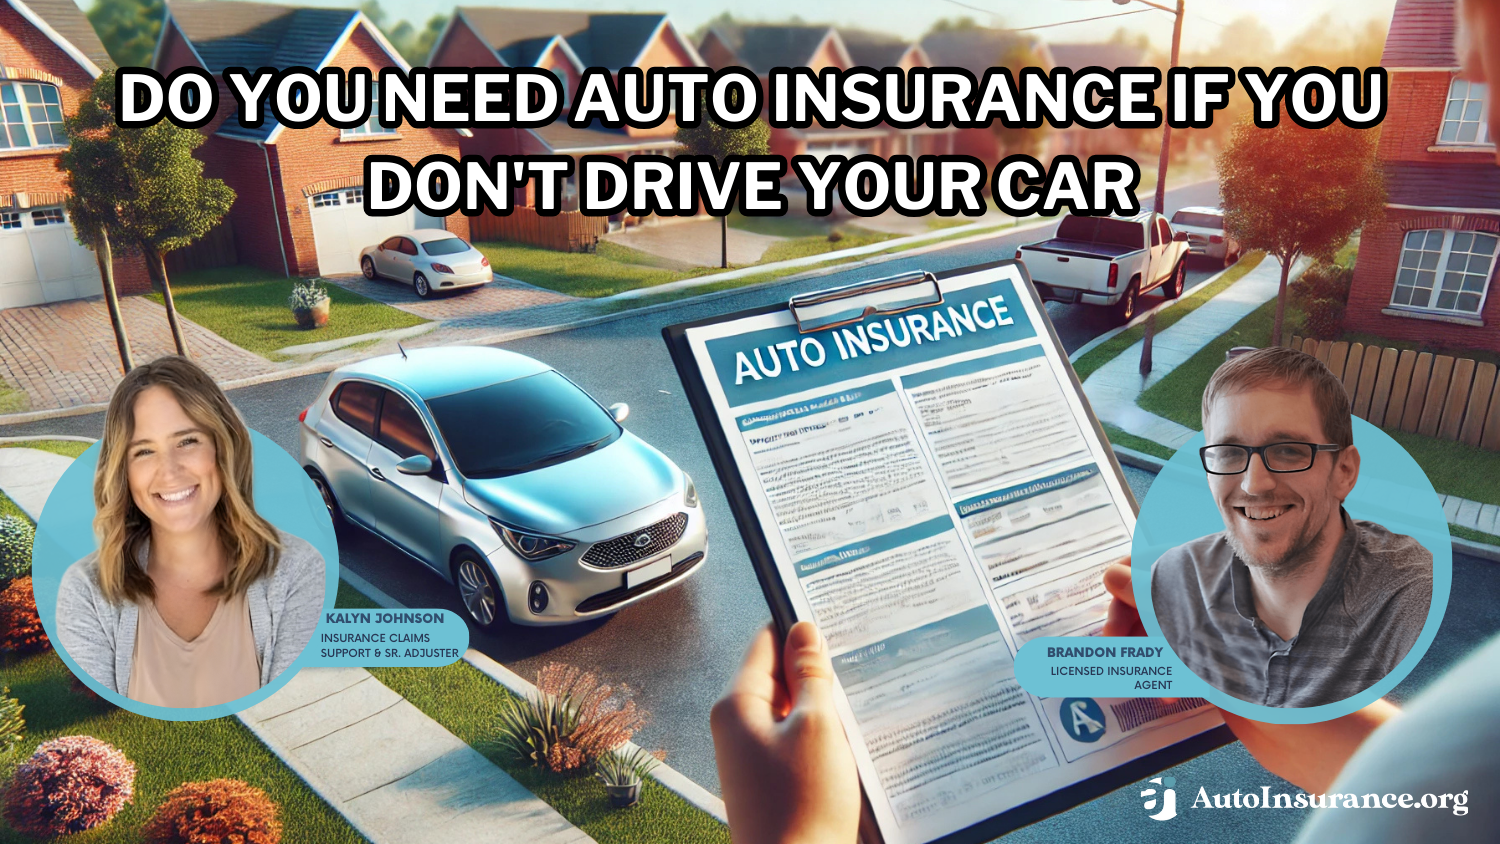 Do you need auto insurance if you don’t drive your car?